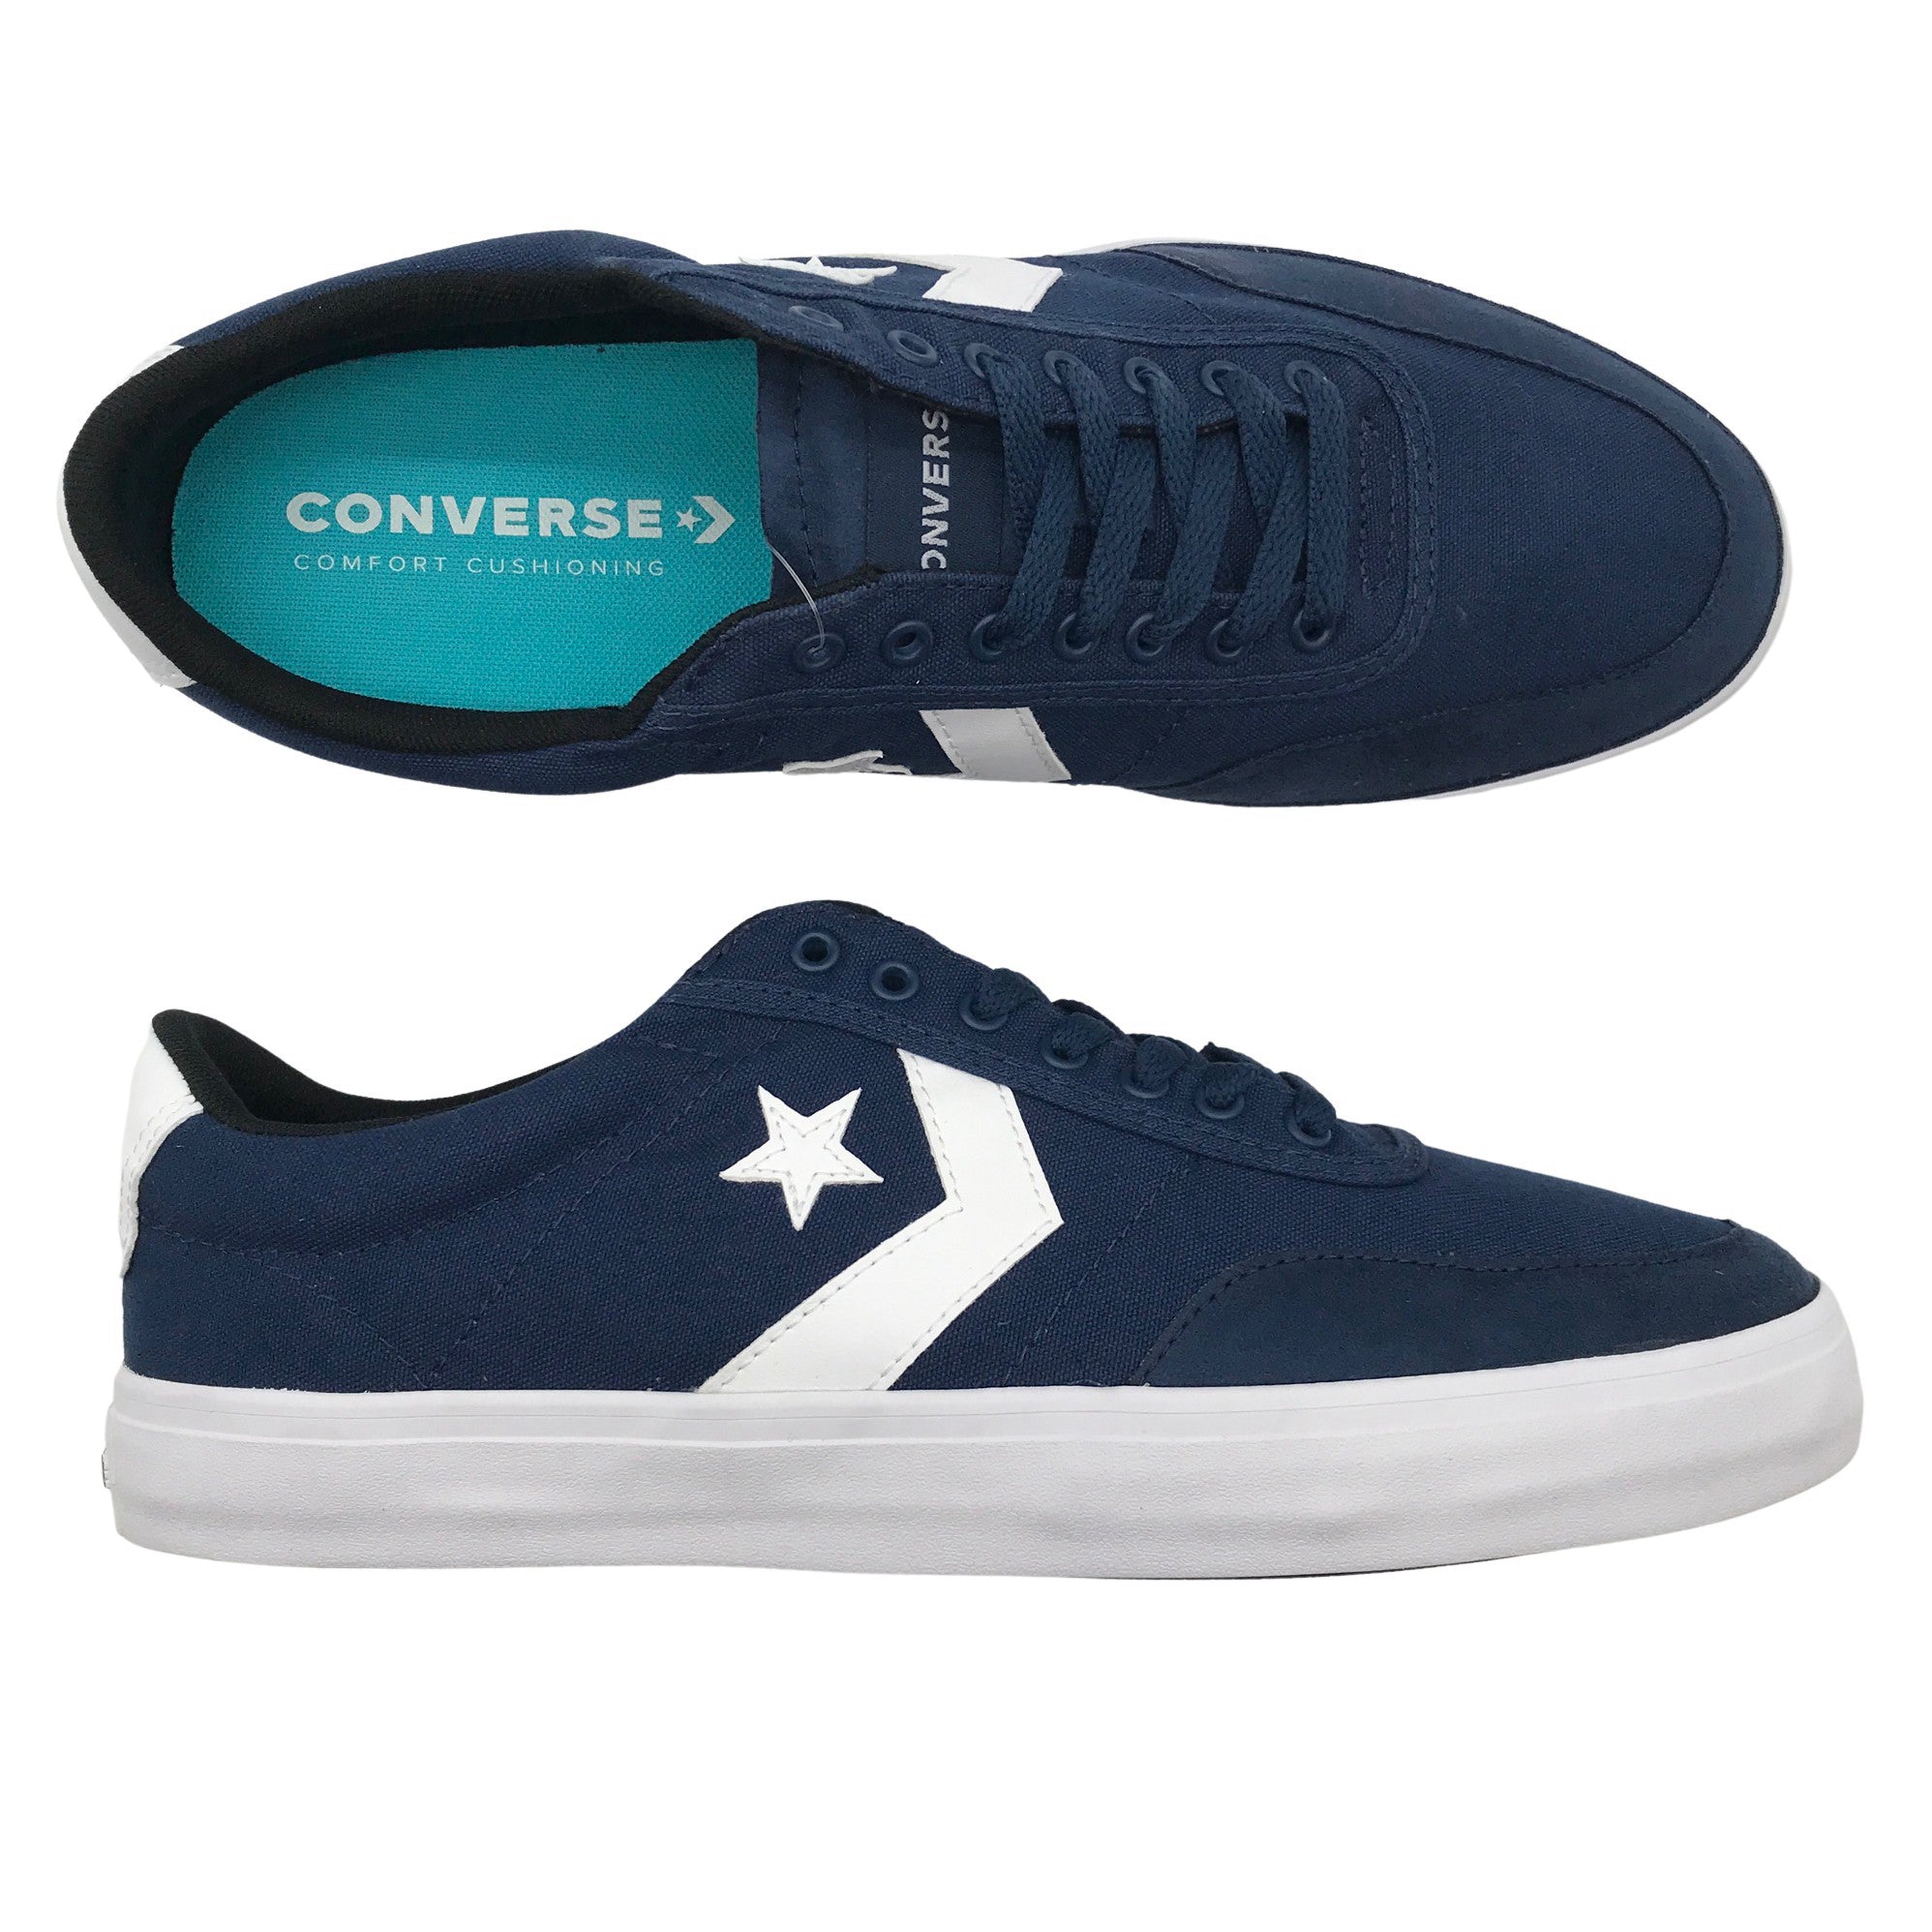 Staple rester Afskedige Unisex Converse Casual sneakers, size 46 (Blue) | Emmy